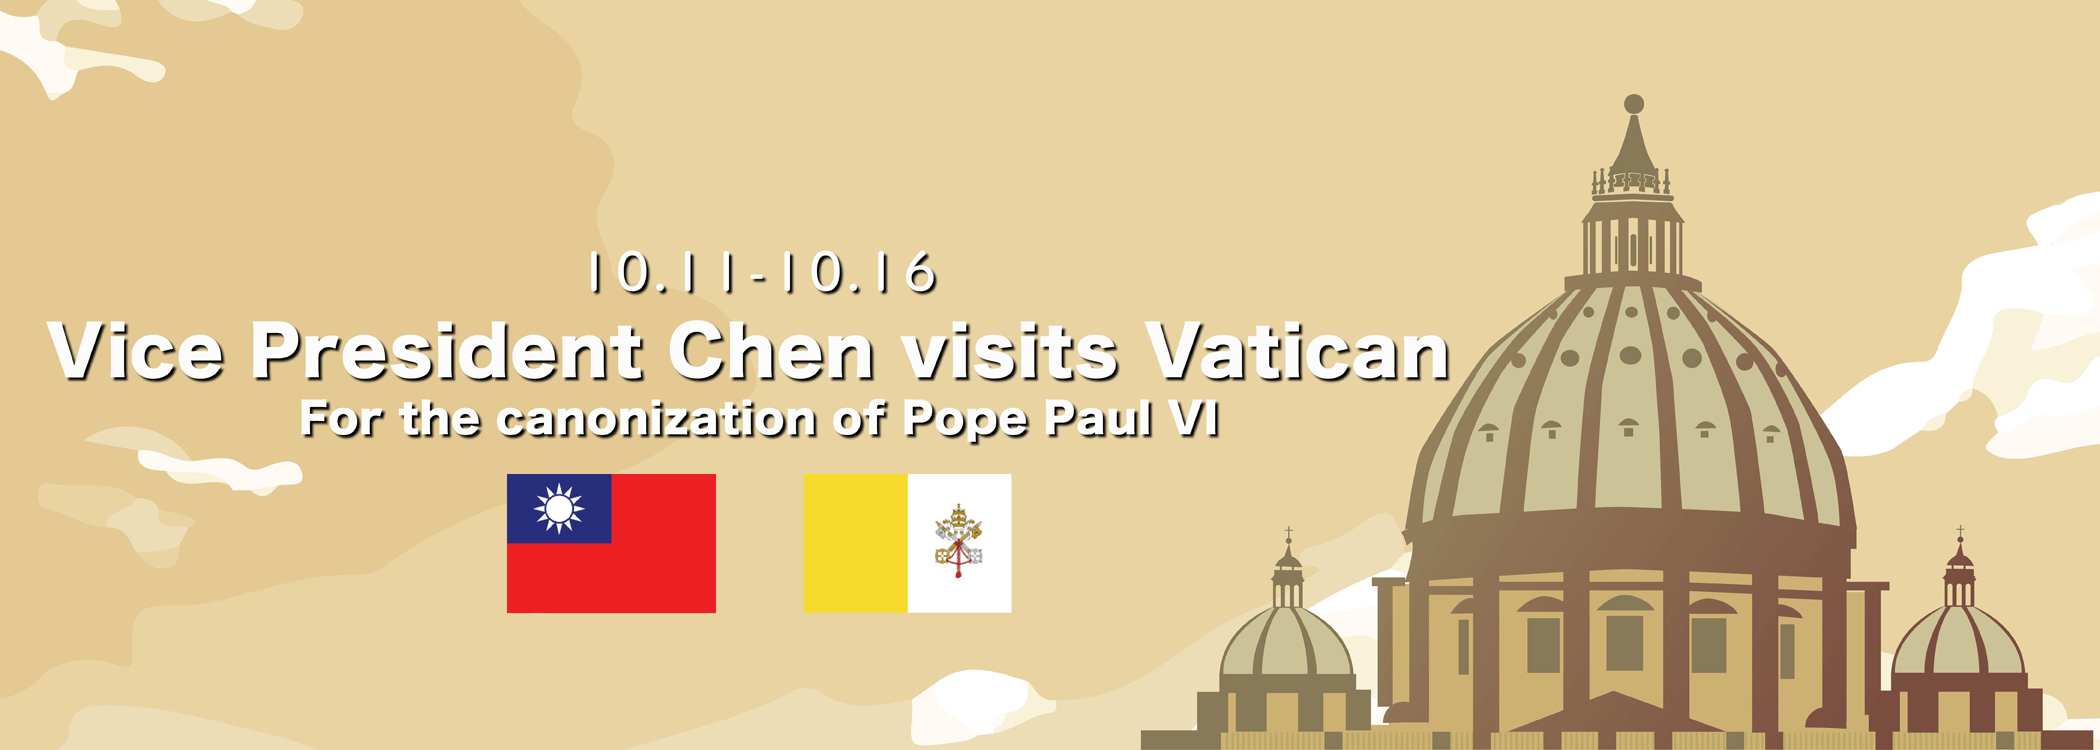 Vice President Chen's 2018 Visit to Holy See